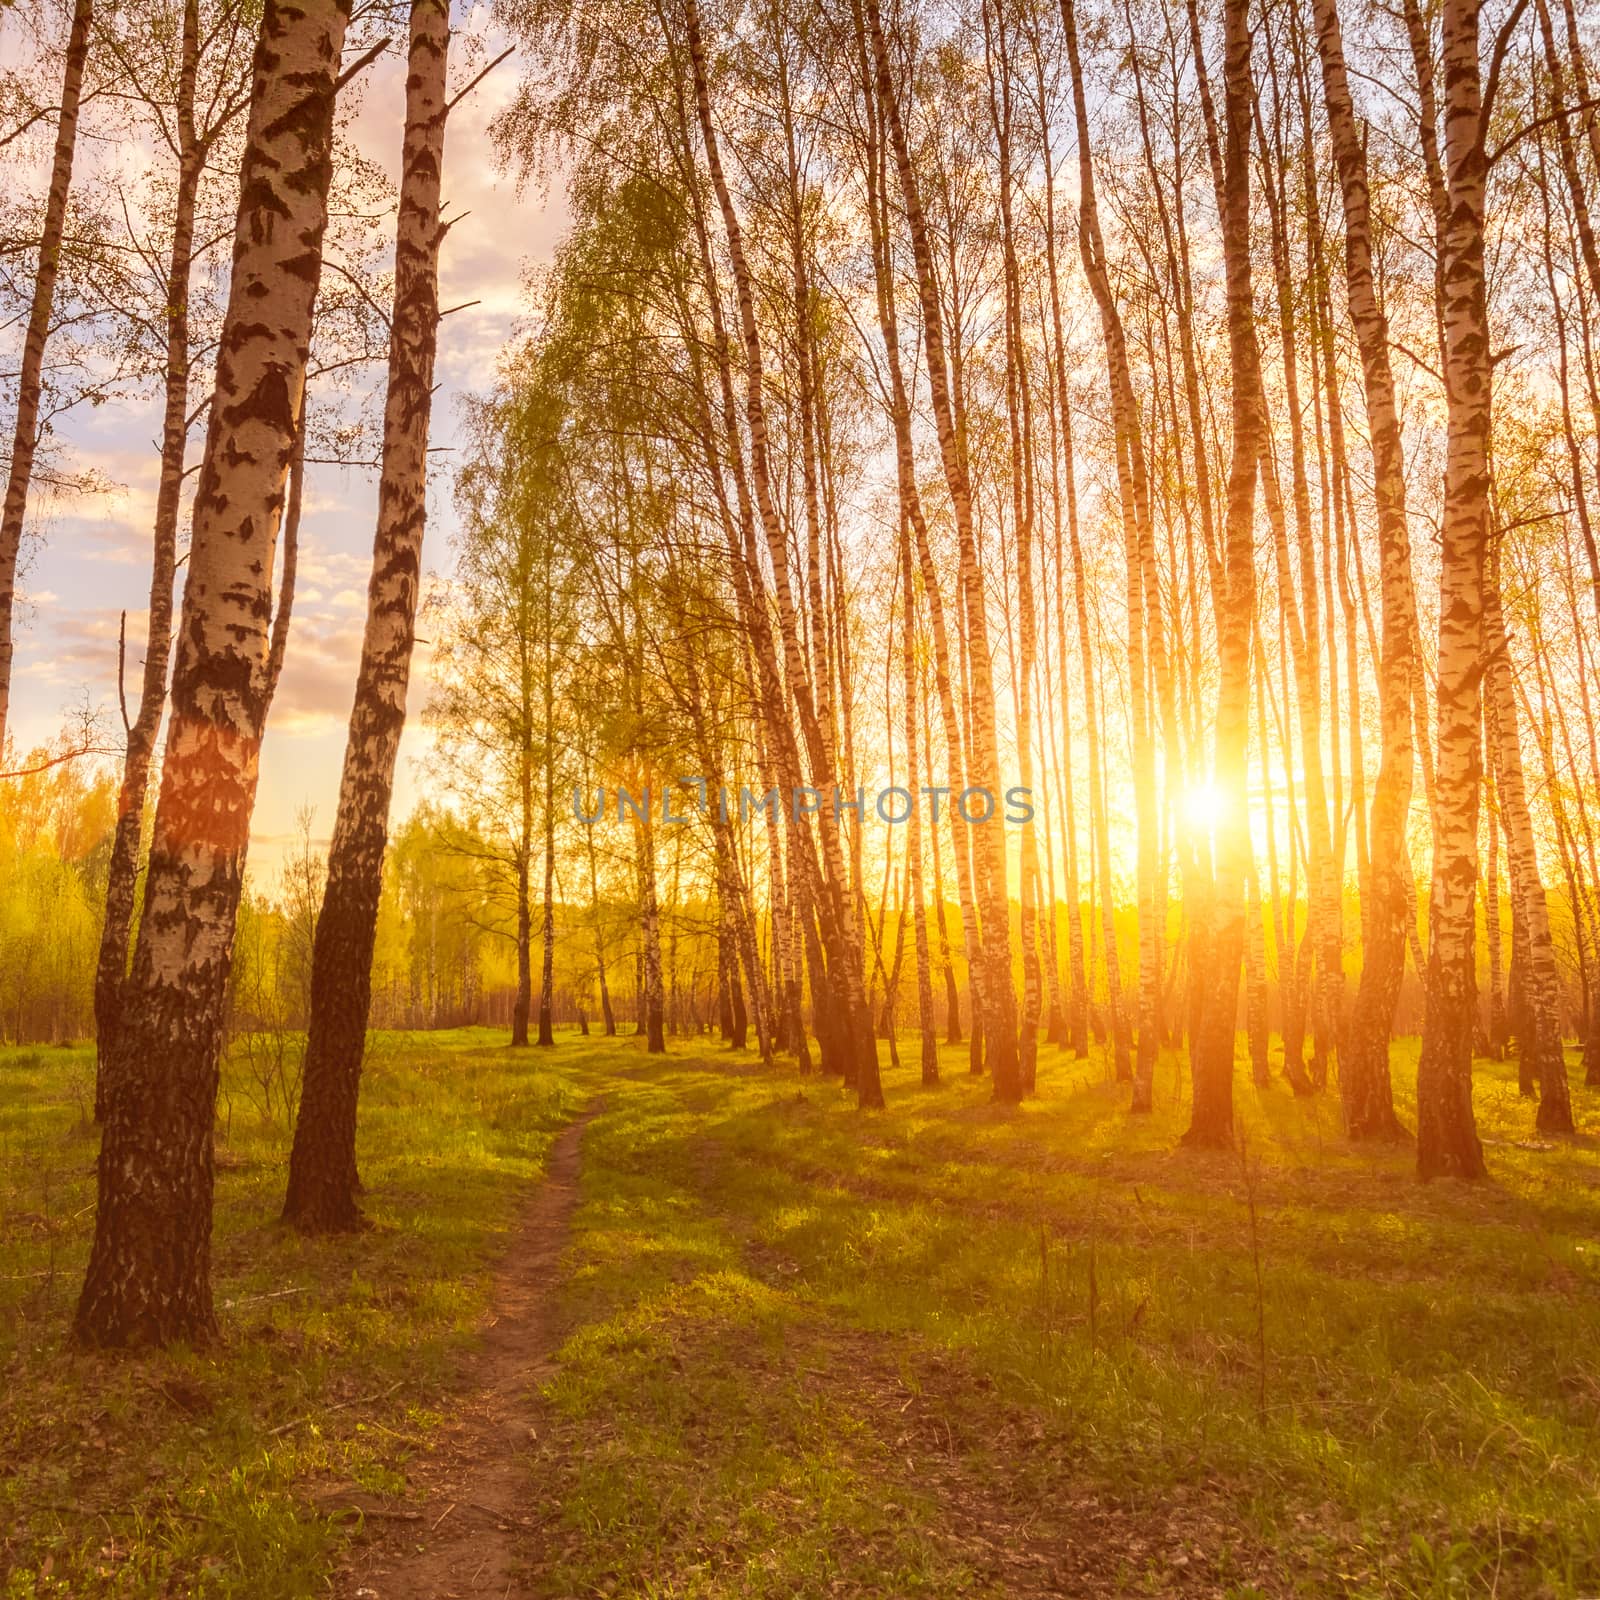 Sunset or dawn in a spring birch forest with bright young foliage glowing in the rays of the sun, shadows from trees and a path.